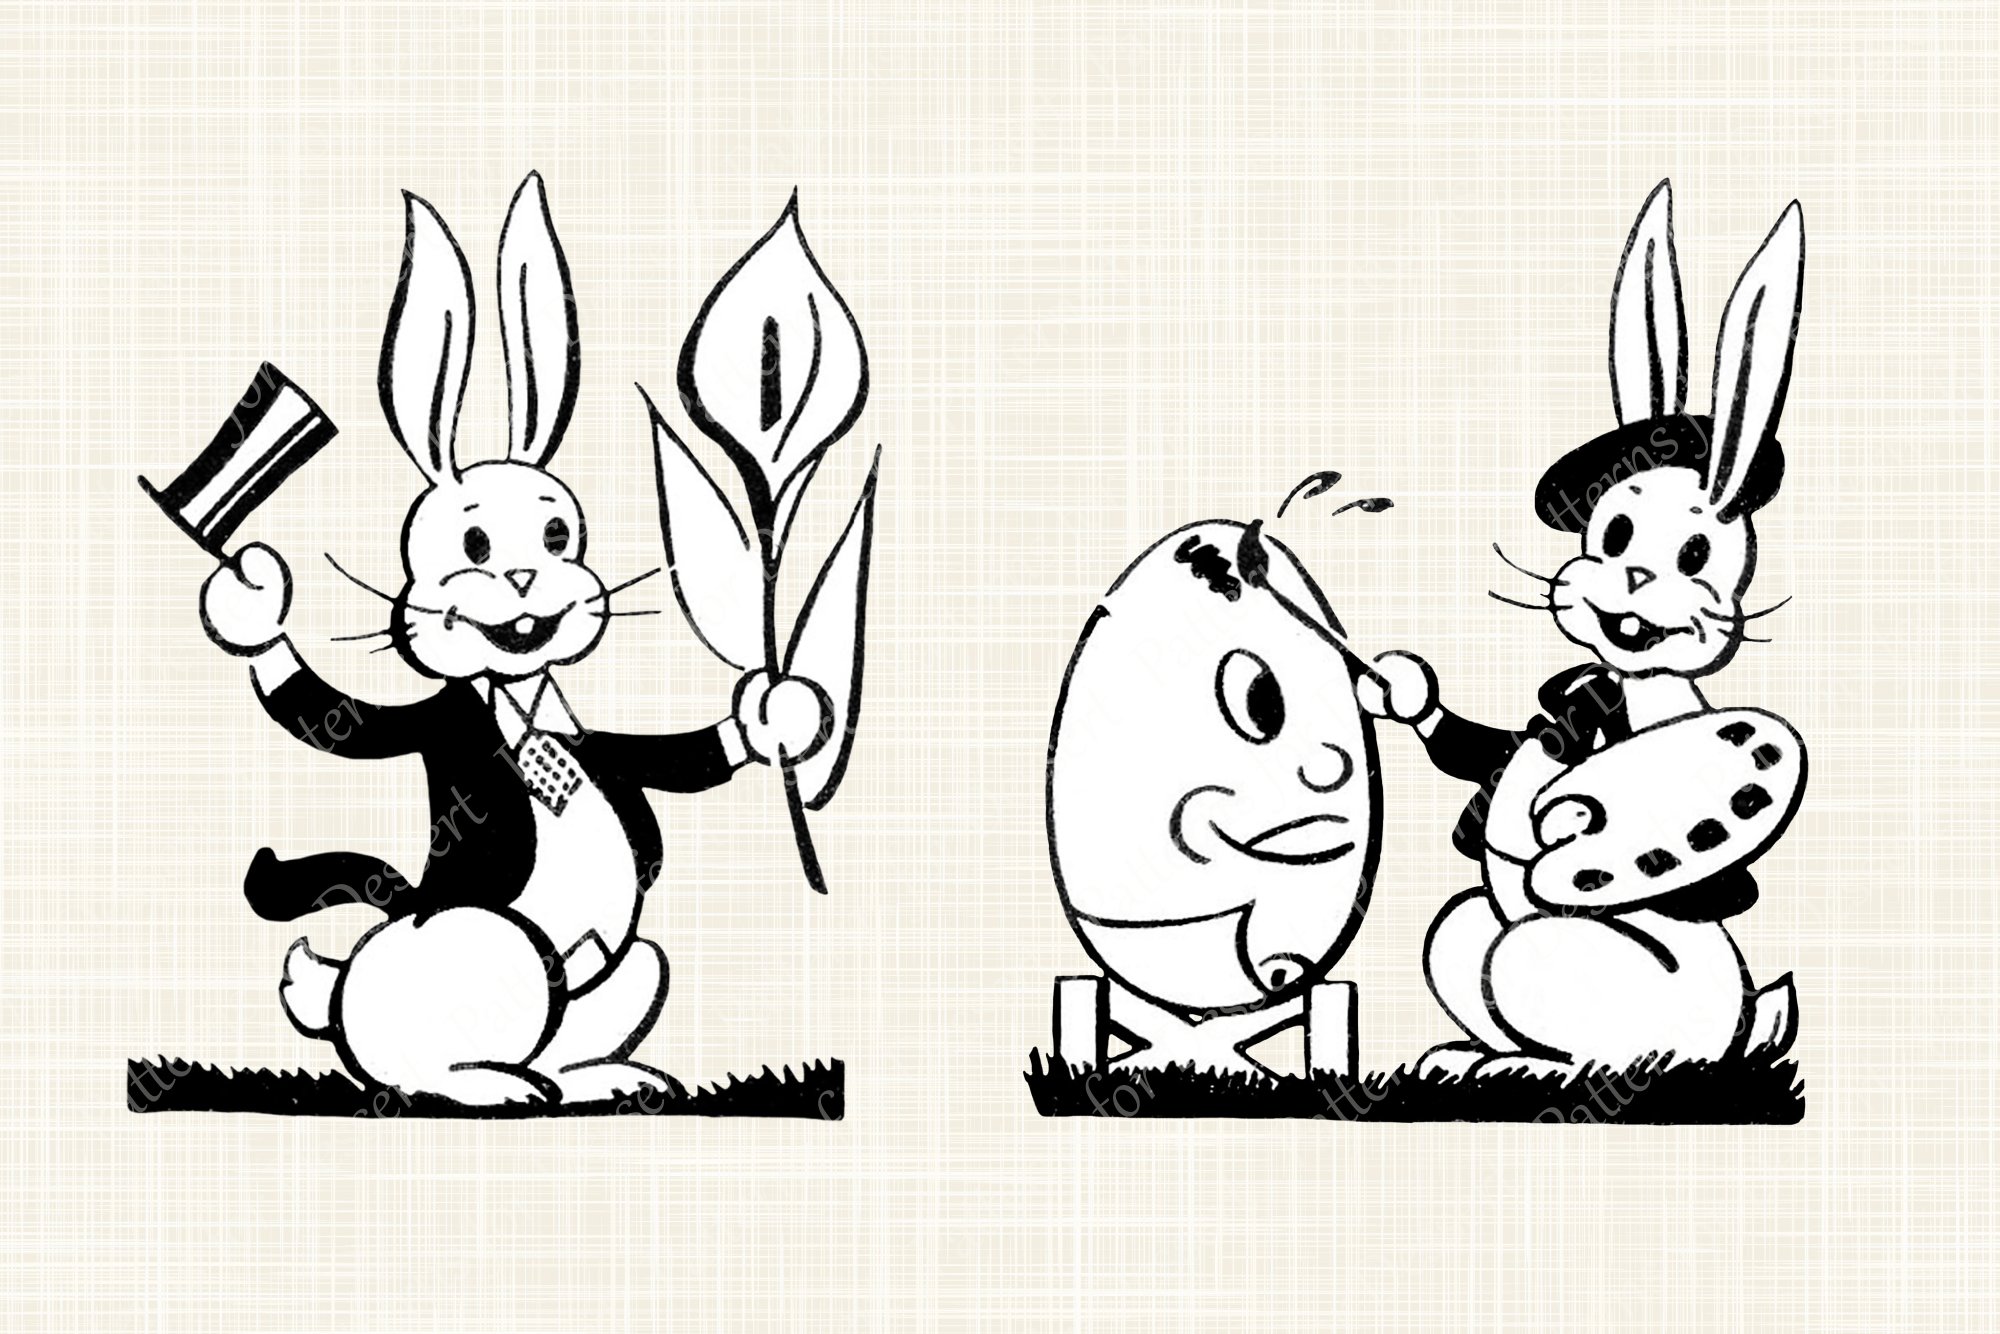 Cool funny rabbits in a BW.